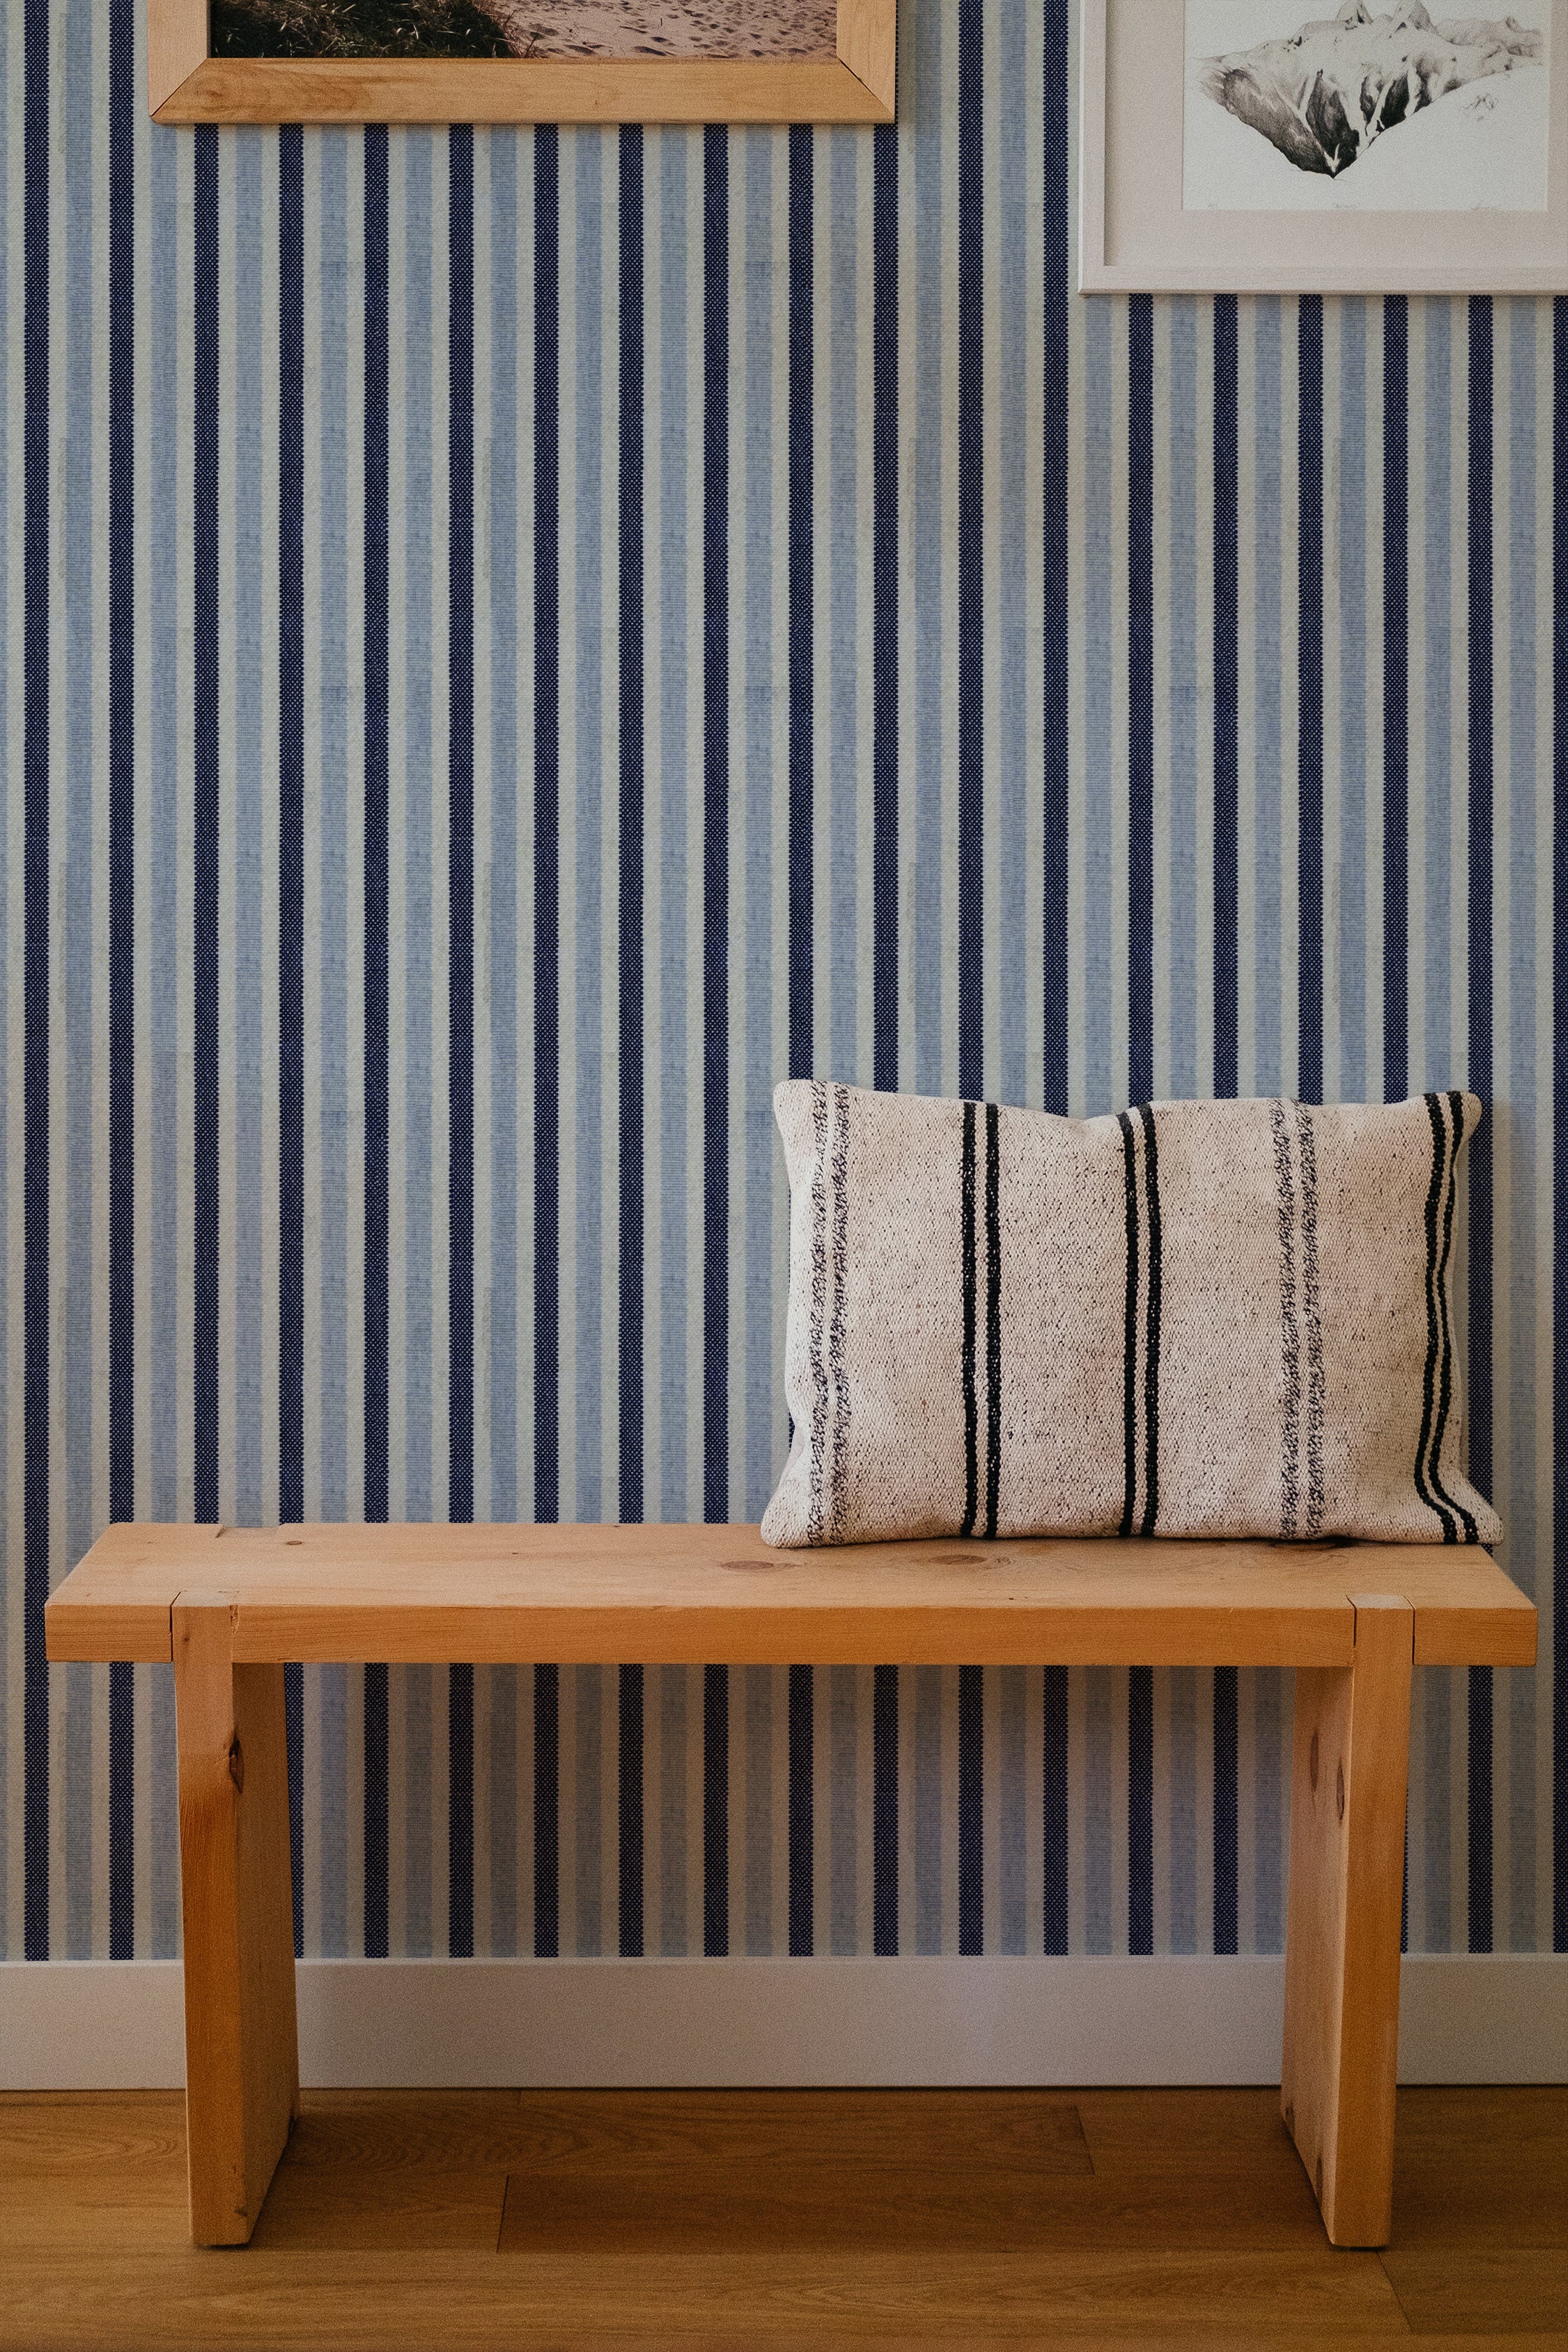 A cozy corner featuring a wooden bench with a striped pillow in front of a wall covered in navy and white striped wallpaper. The wall is decorated with framed pictures, adding a touch of warmth and charm to the space